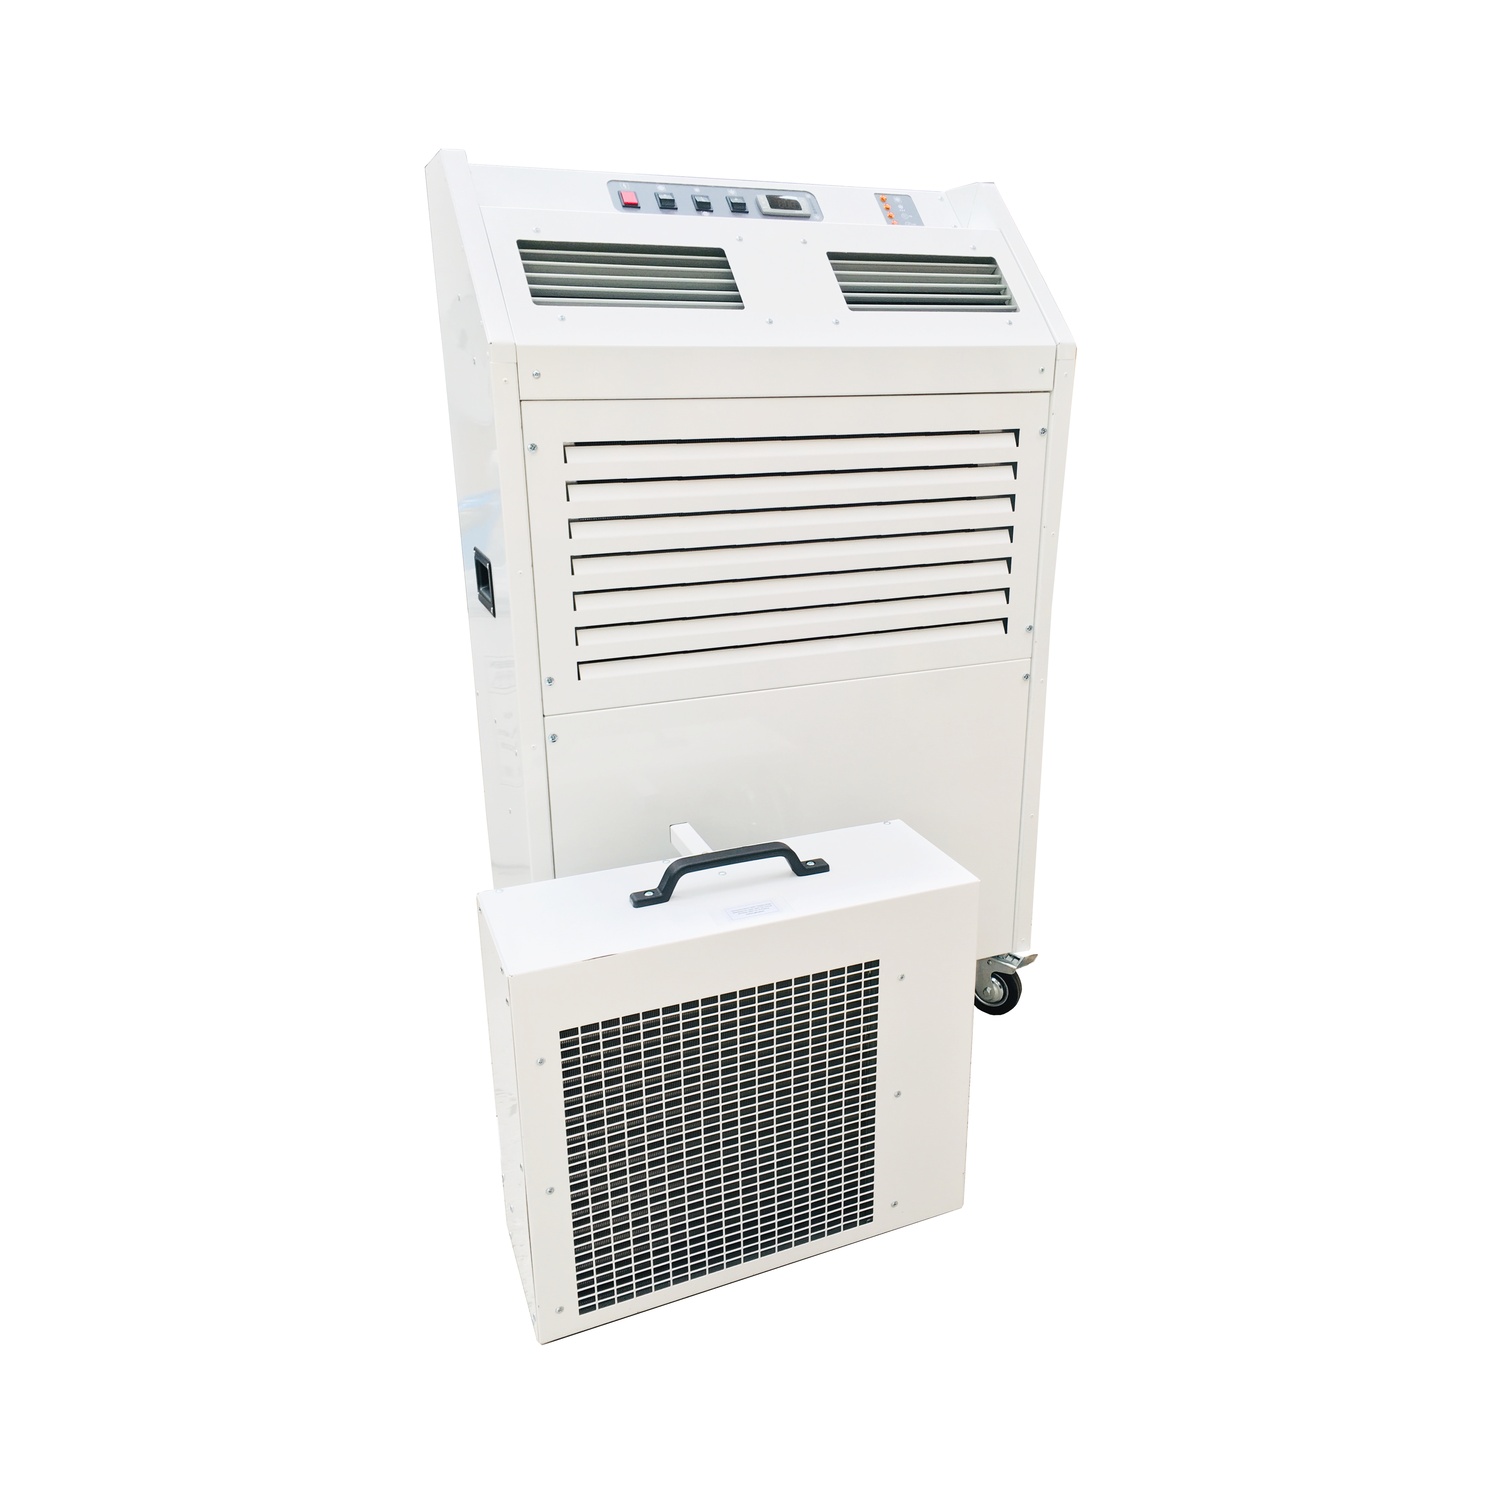 Broughton 7.4kW Low GWP Portable Water Cooled Commercial Split System Air Conditioner with Plate Hea